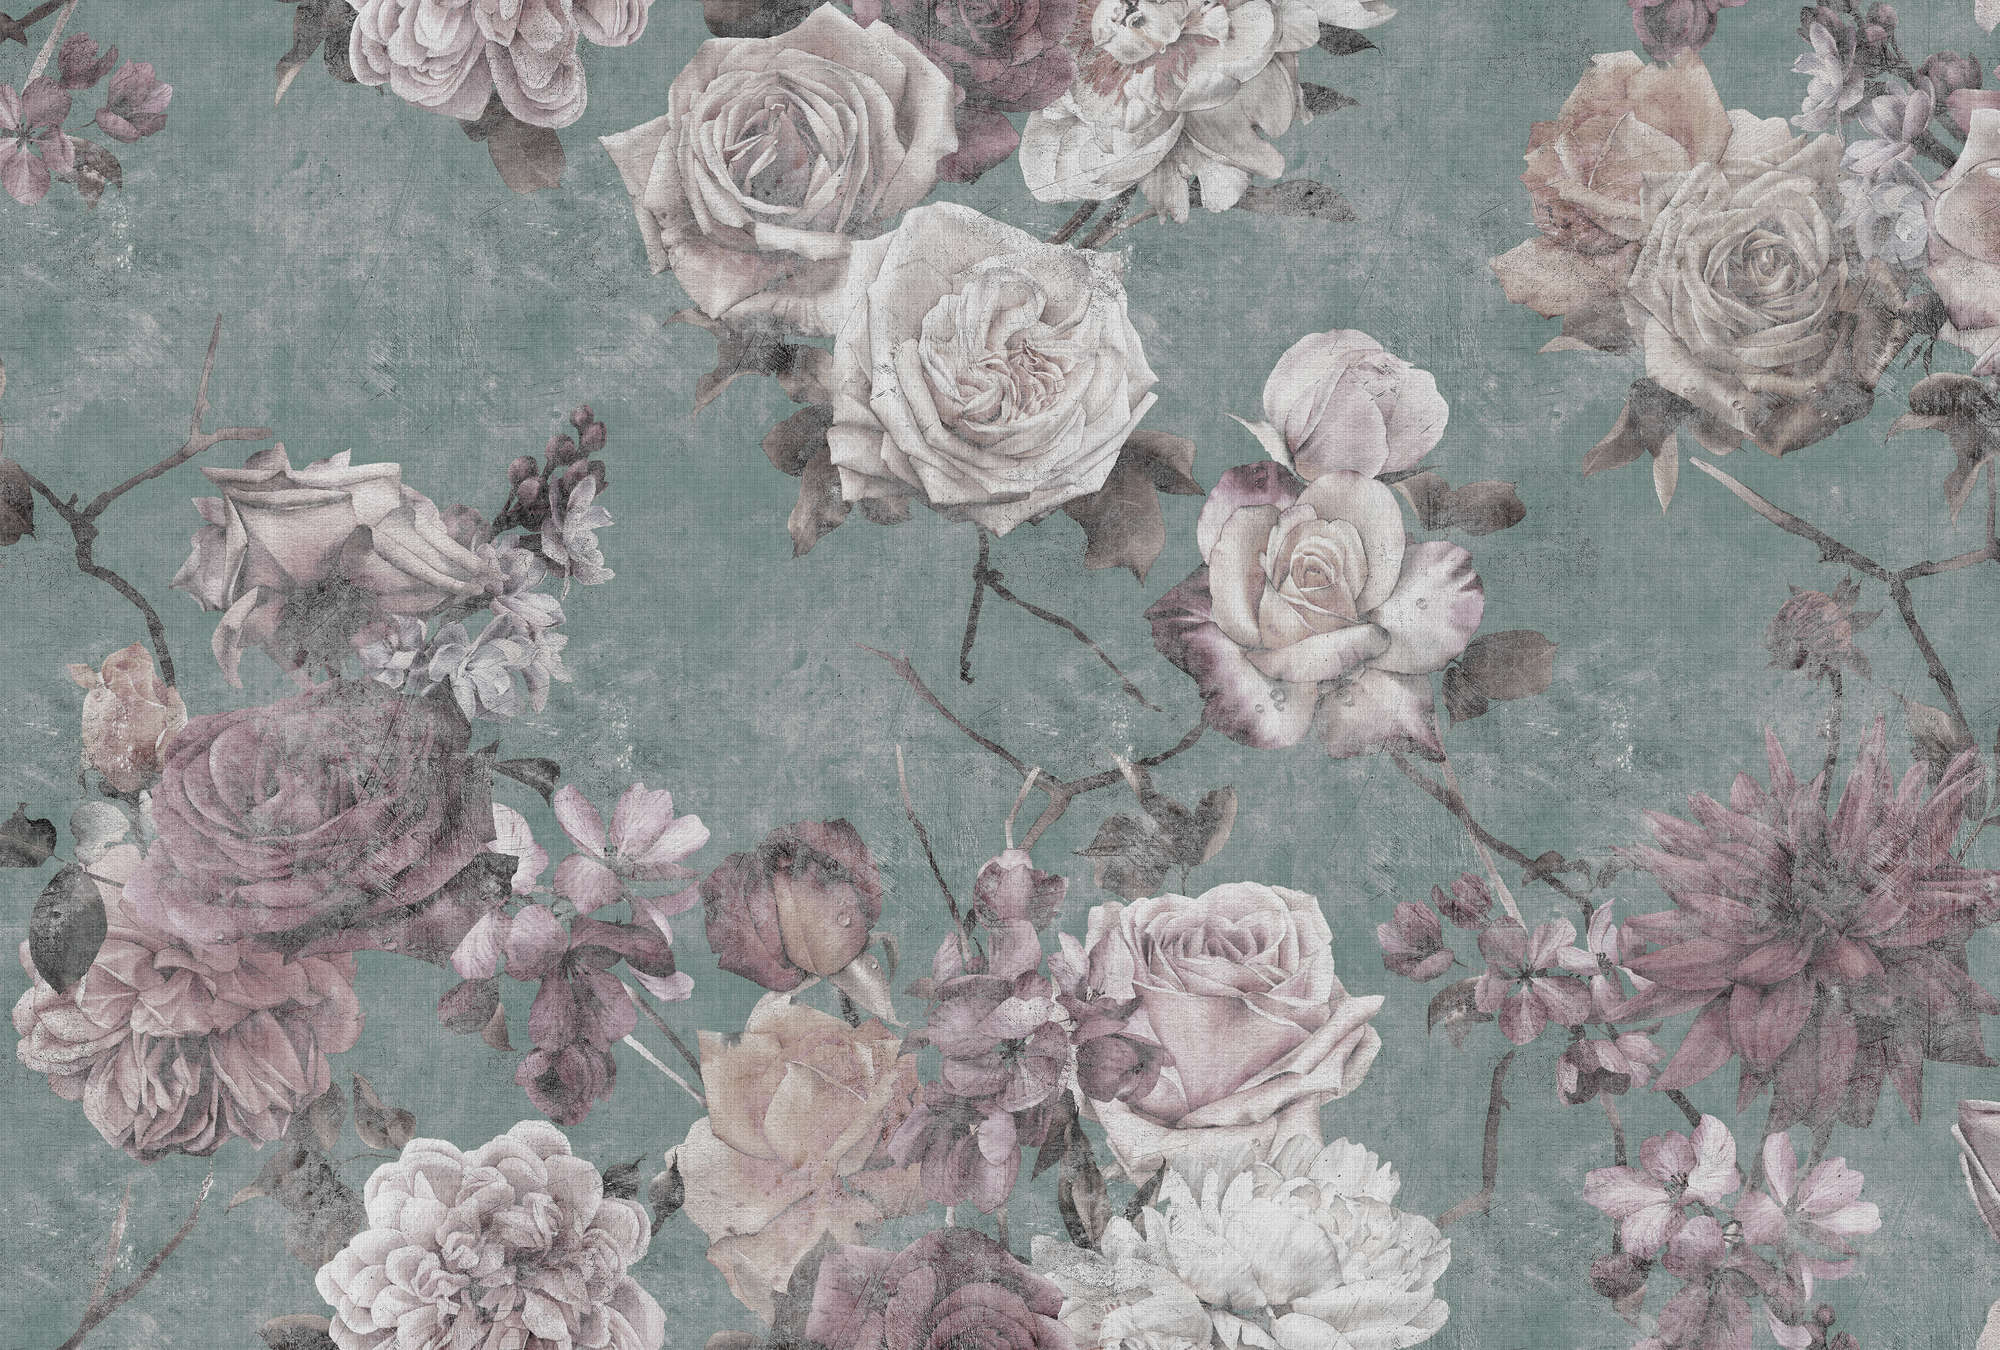             Sleeping Beauty 2 - Wallpaper Rose Blossoms in Vintage Style - Nature Linen Texture - Pink, Turquoise | Texture Non-woven
        